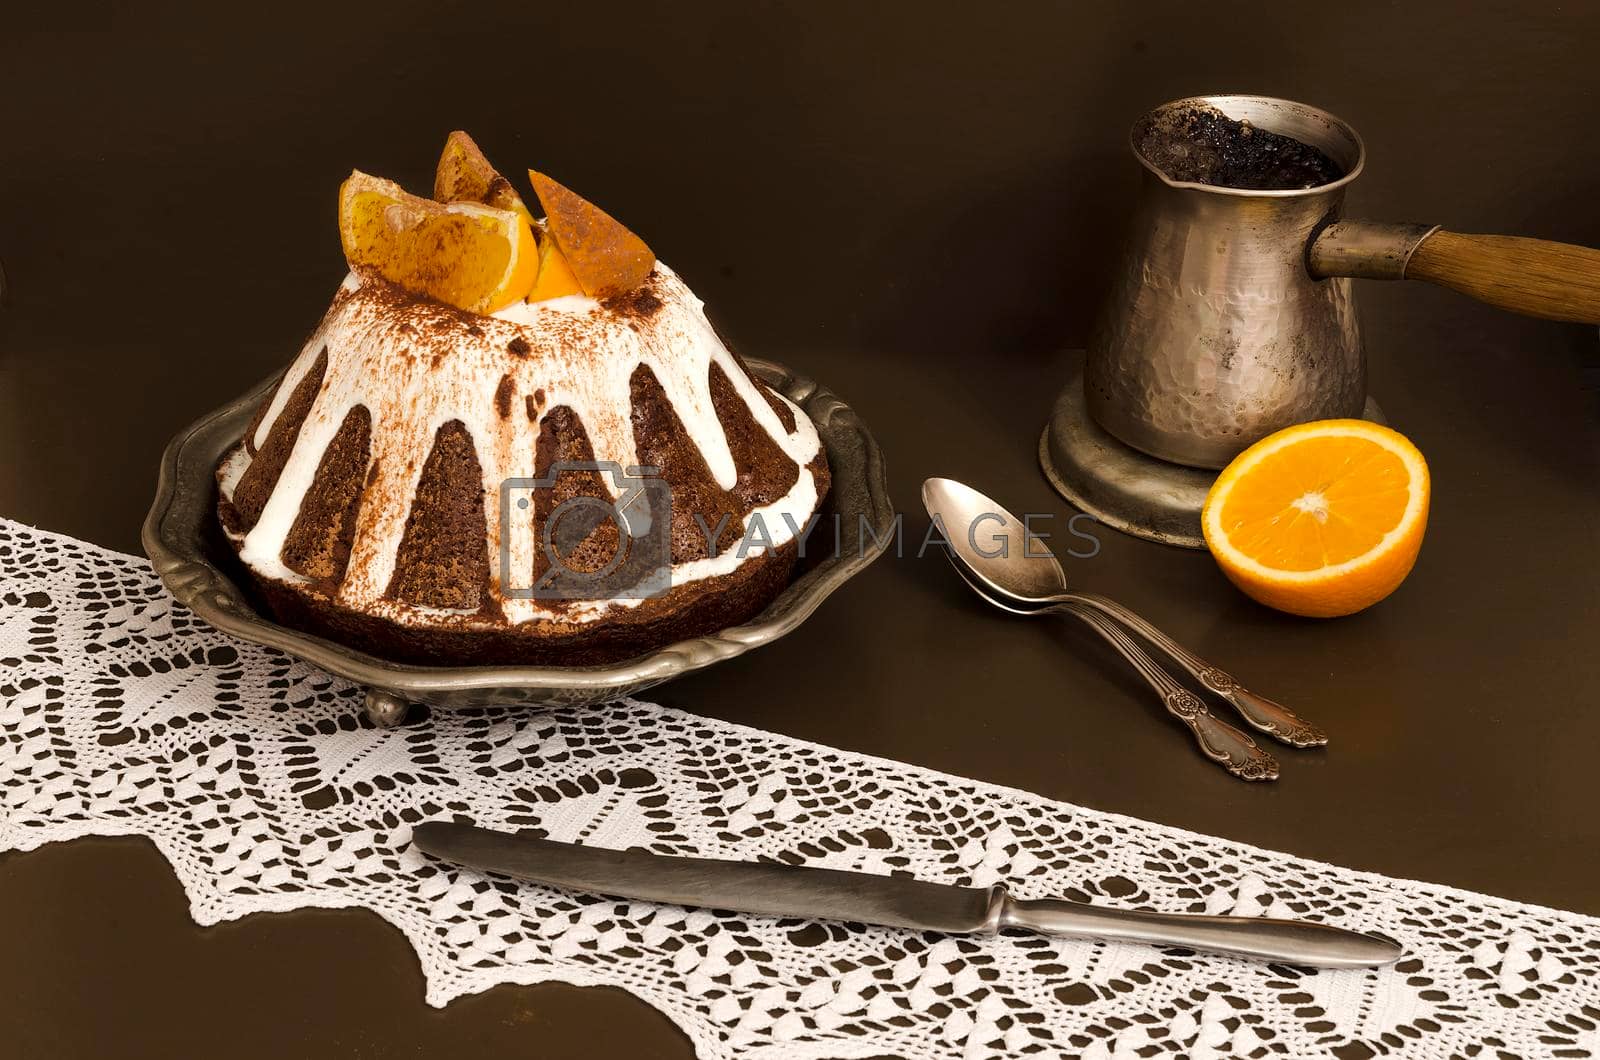 Royalty free image of Chocolate orange cake covered with icing by zimages